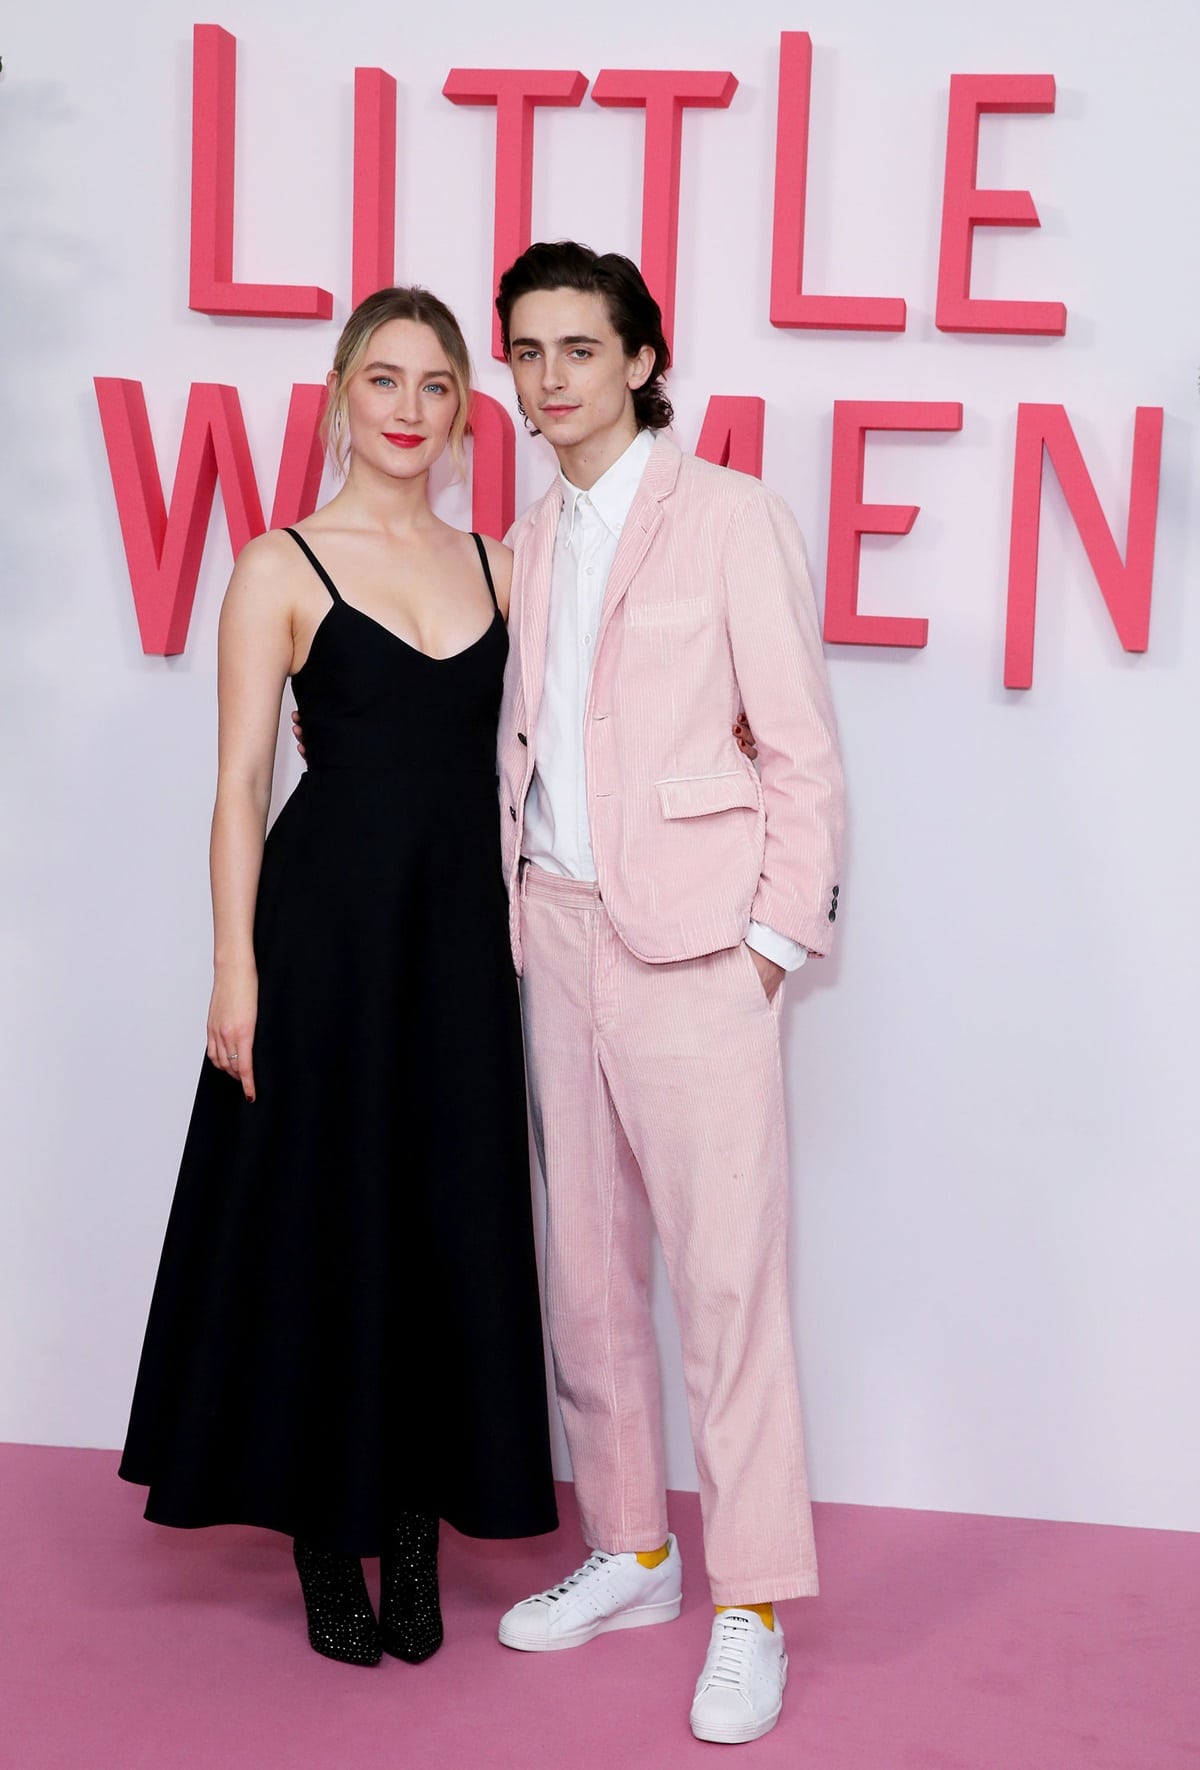 Saoirse Ronan and Timothée Chalamet had previously starred together in the 2017 movie Lady Bird as love interests which contributed to their casting in Little Women